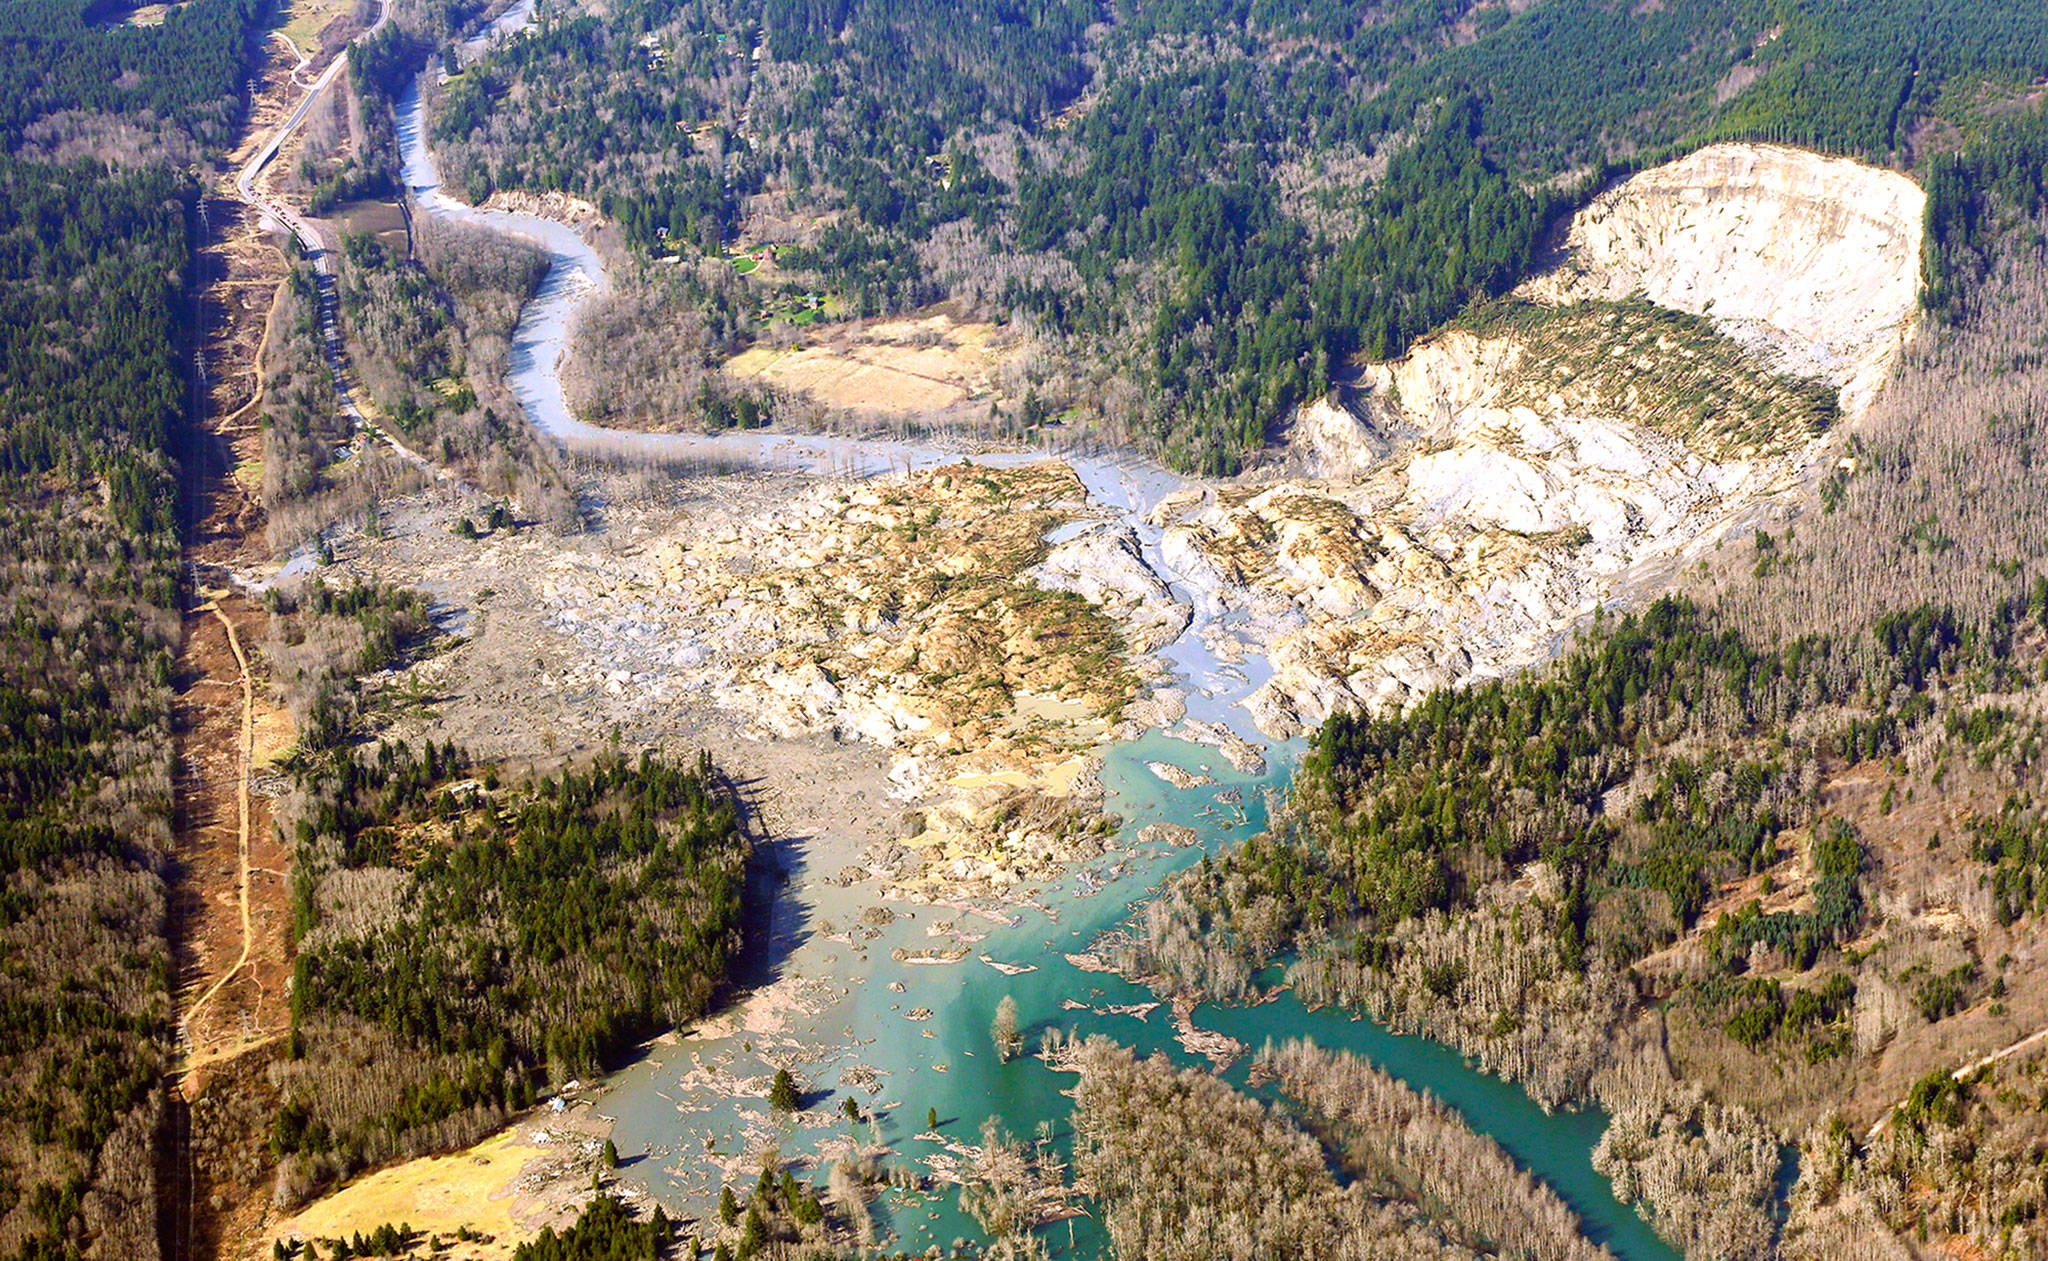 The massive mudslide that killed 43 people, as seen from the air a few days after the disaster near Oso. (AP File/Ted S. Warren)